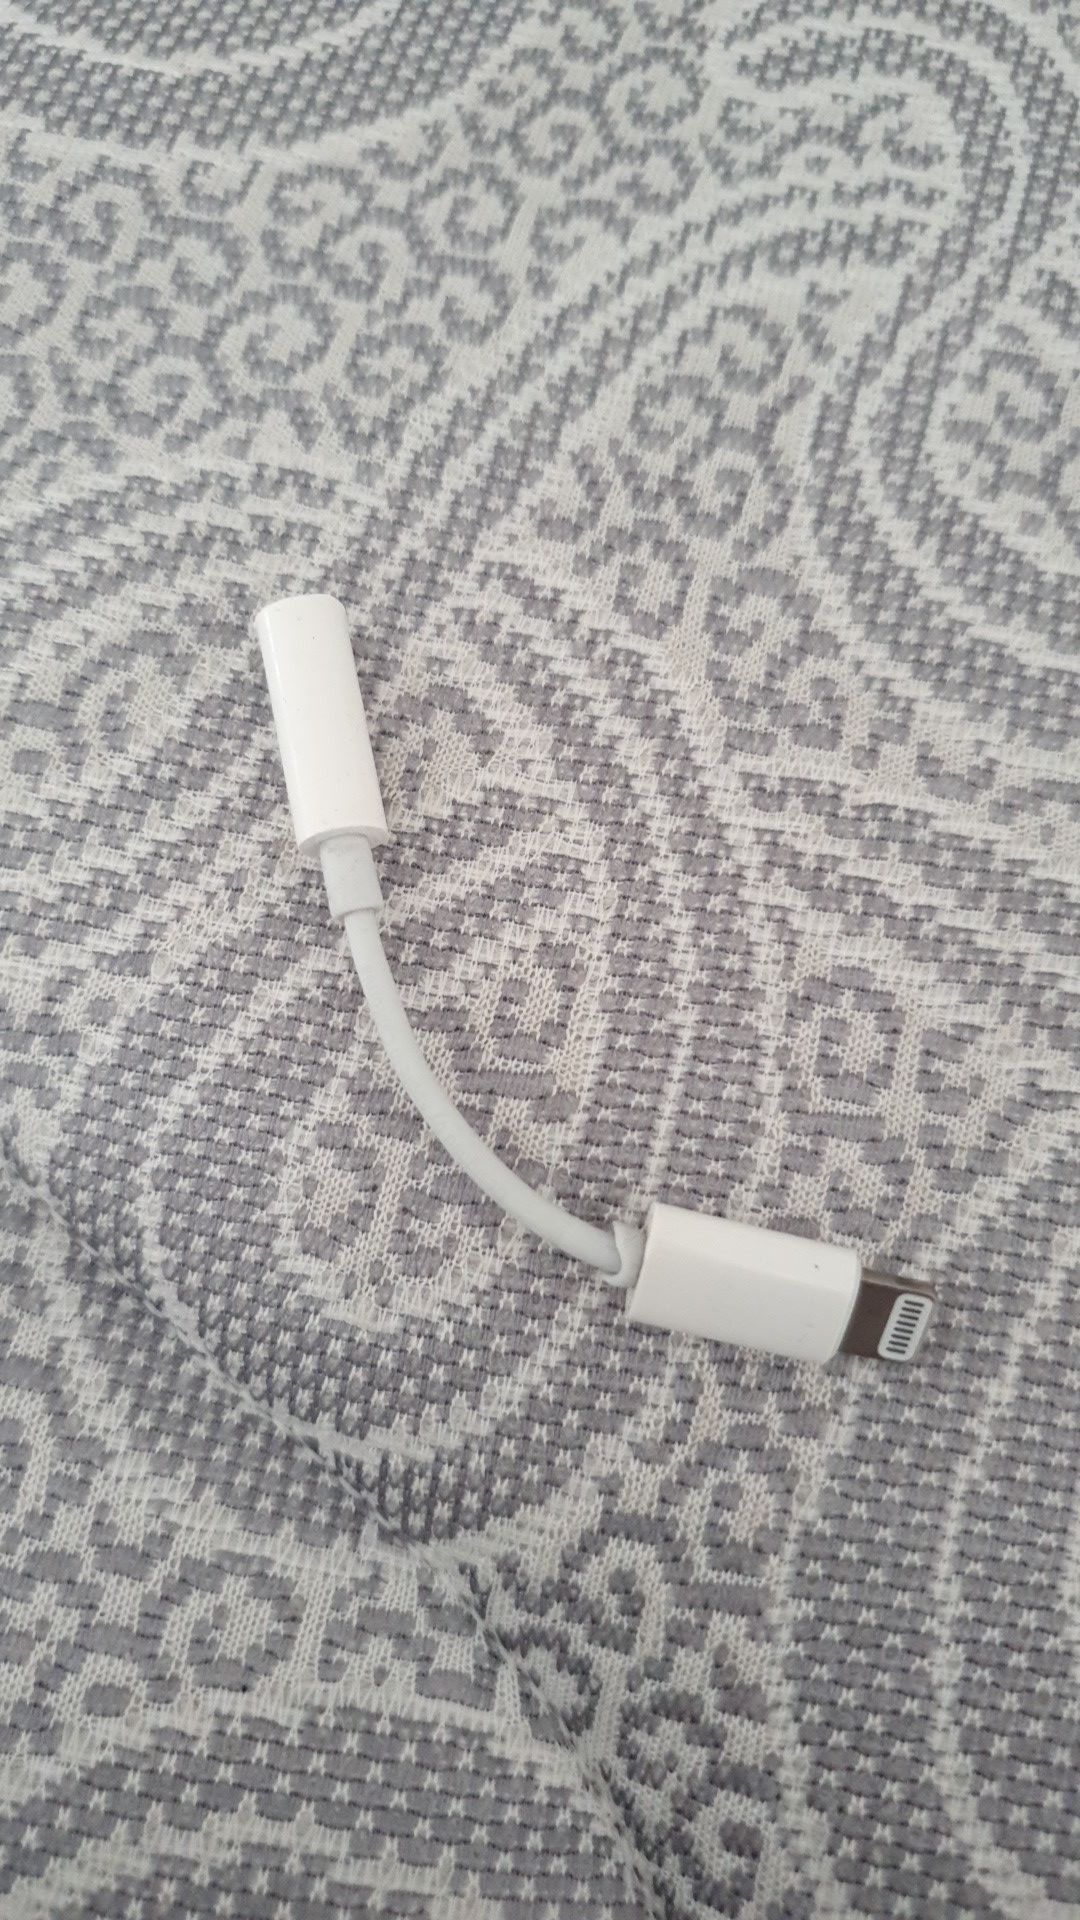 IPhone adapter for sale $ 15